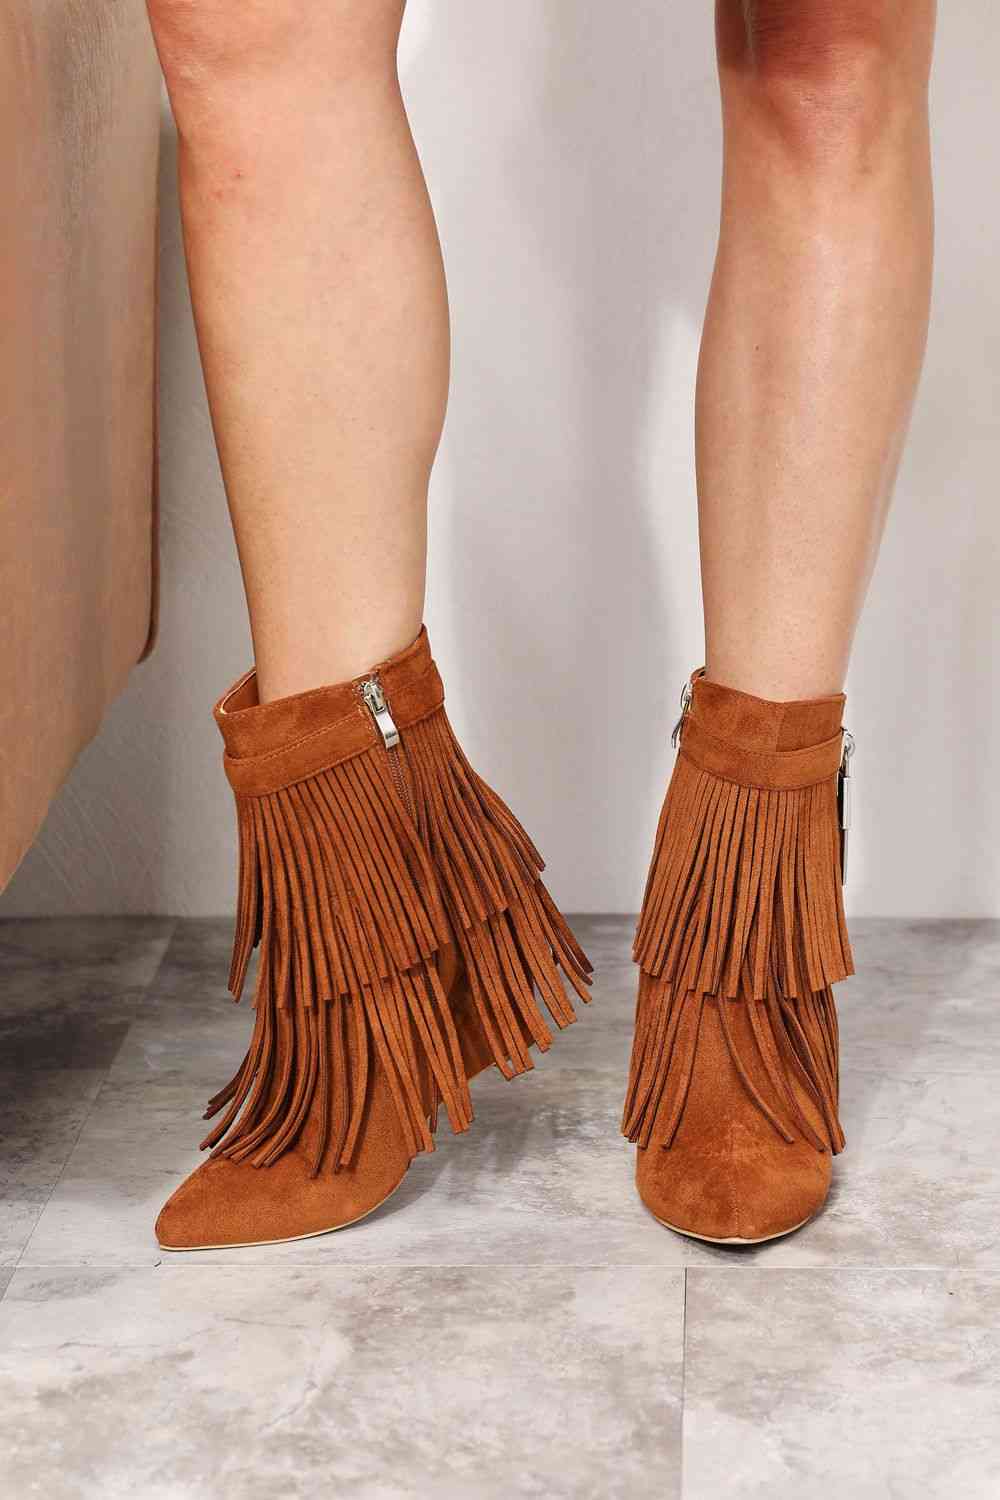 "Alt Text: A pair of stylish Legend Women's Tassel Wedge Heel Ankle Booties in a rich color, featuring a fashionable design with tassel details. The wedge heel adds height and comfort, making these booties a perfect blend of style and practicality for any occasion."